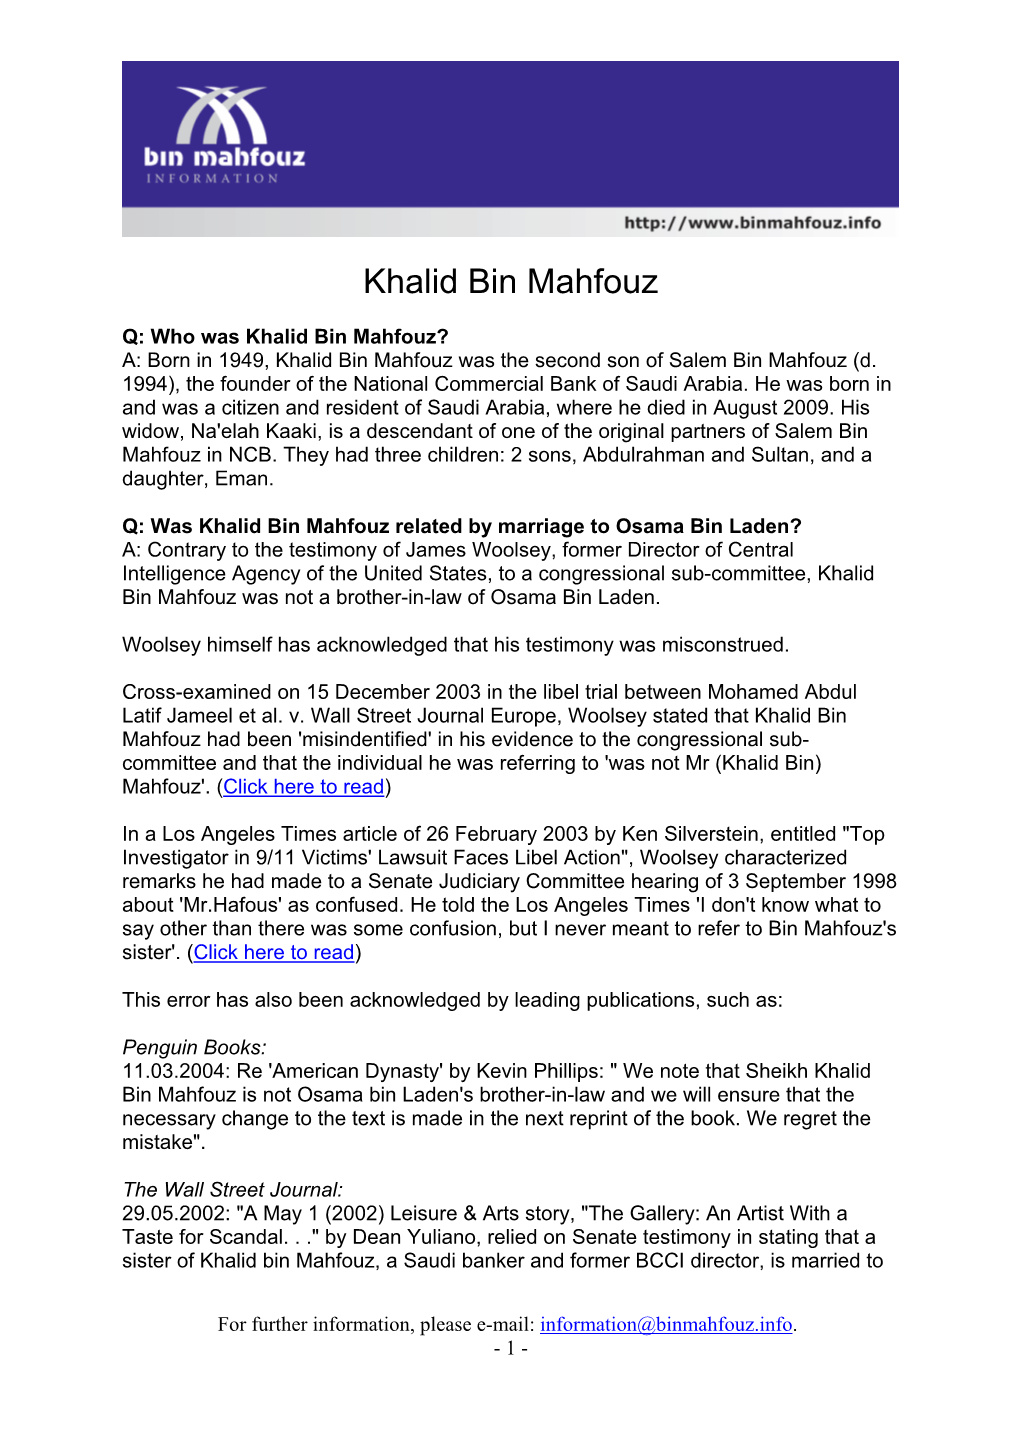 Sheikh Khalid Bin Mahfouz Is Not Osama Bin Laden's Brother-In-Law and We Will Ensure That the Necessary Change to the Text Is Made in the Next Reprint of the Book